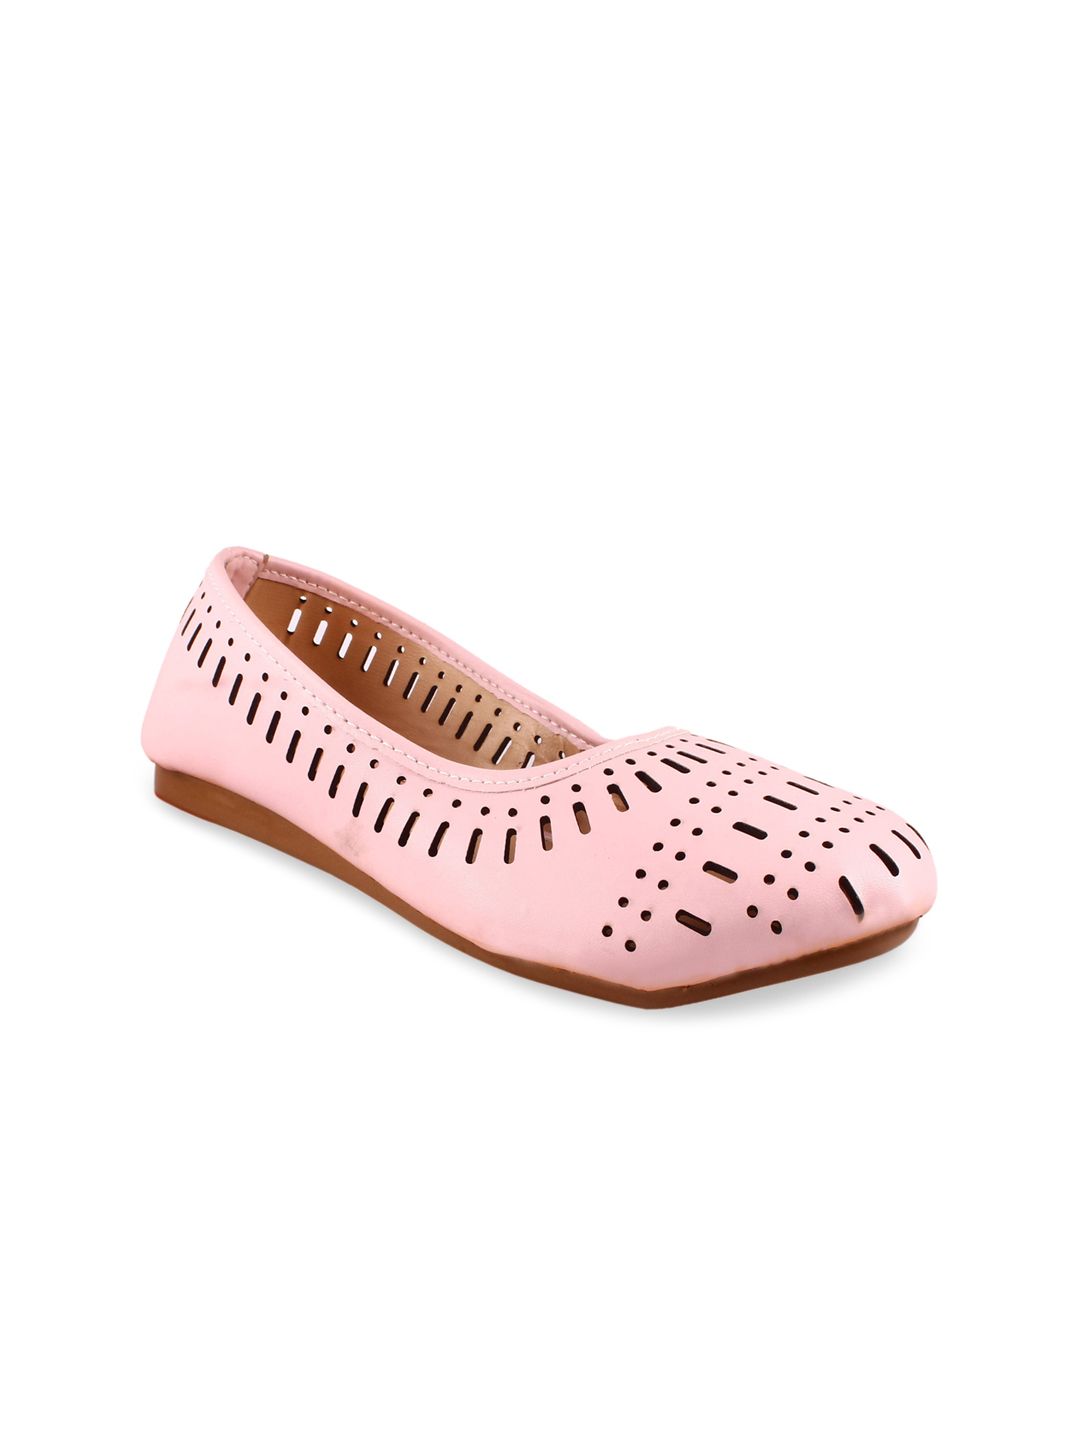 Apratim Women Pink Party Ballerinas with Laser Cuts Flats Price in India